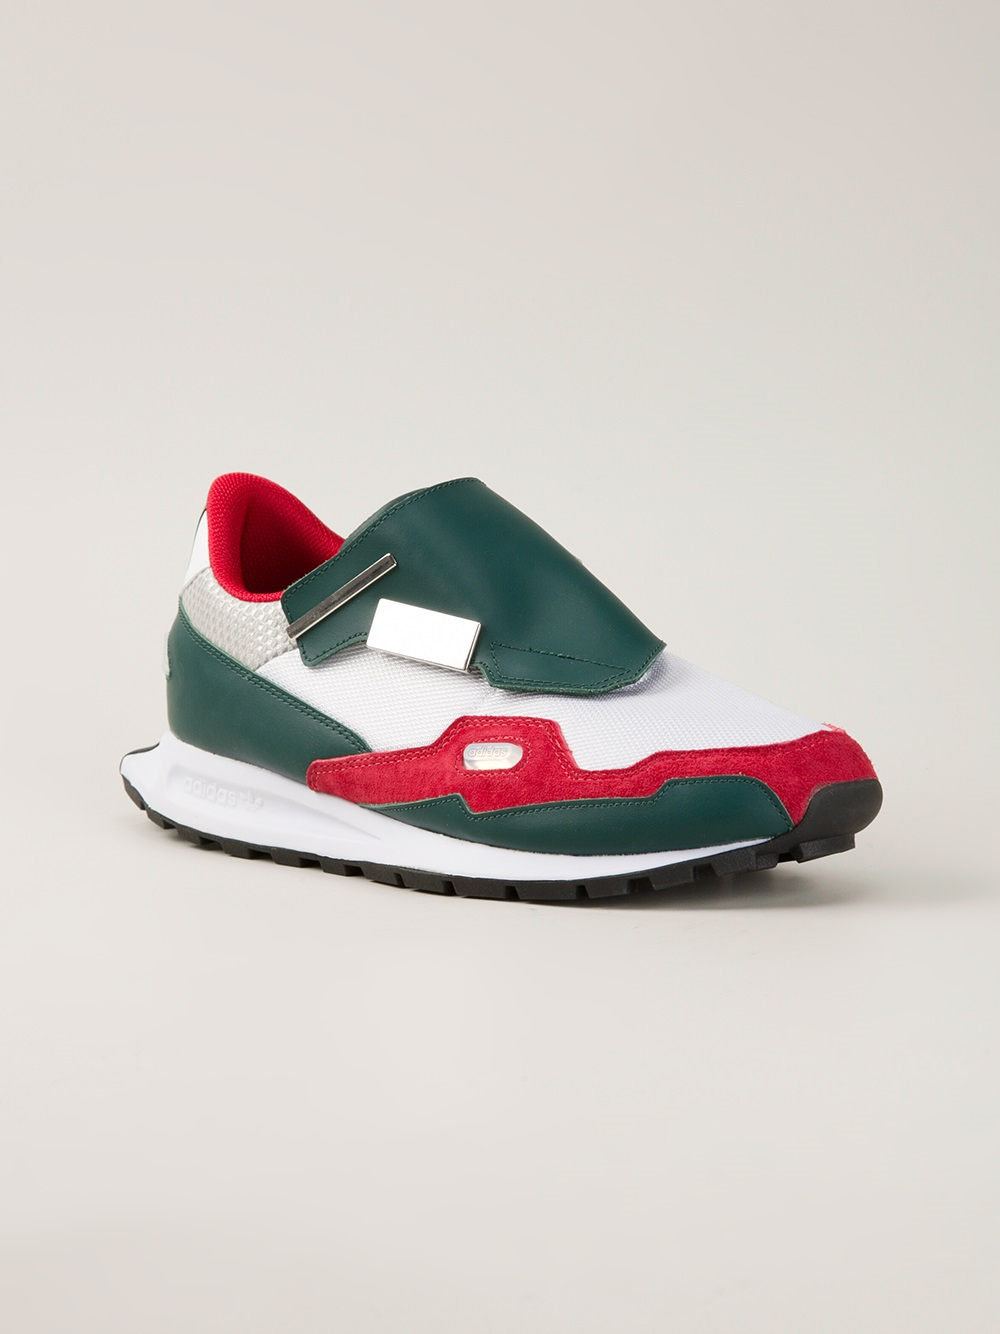 Lyst - Adidas By Raf Simons Formula One Trainers in Green for Men